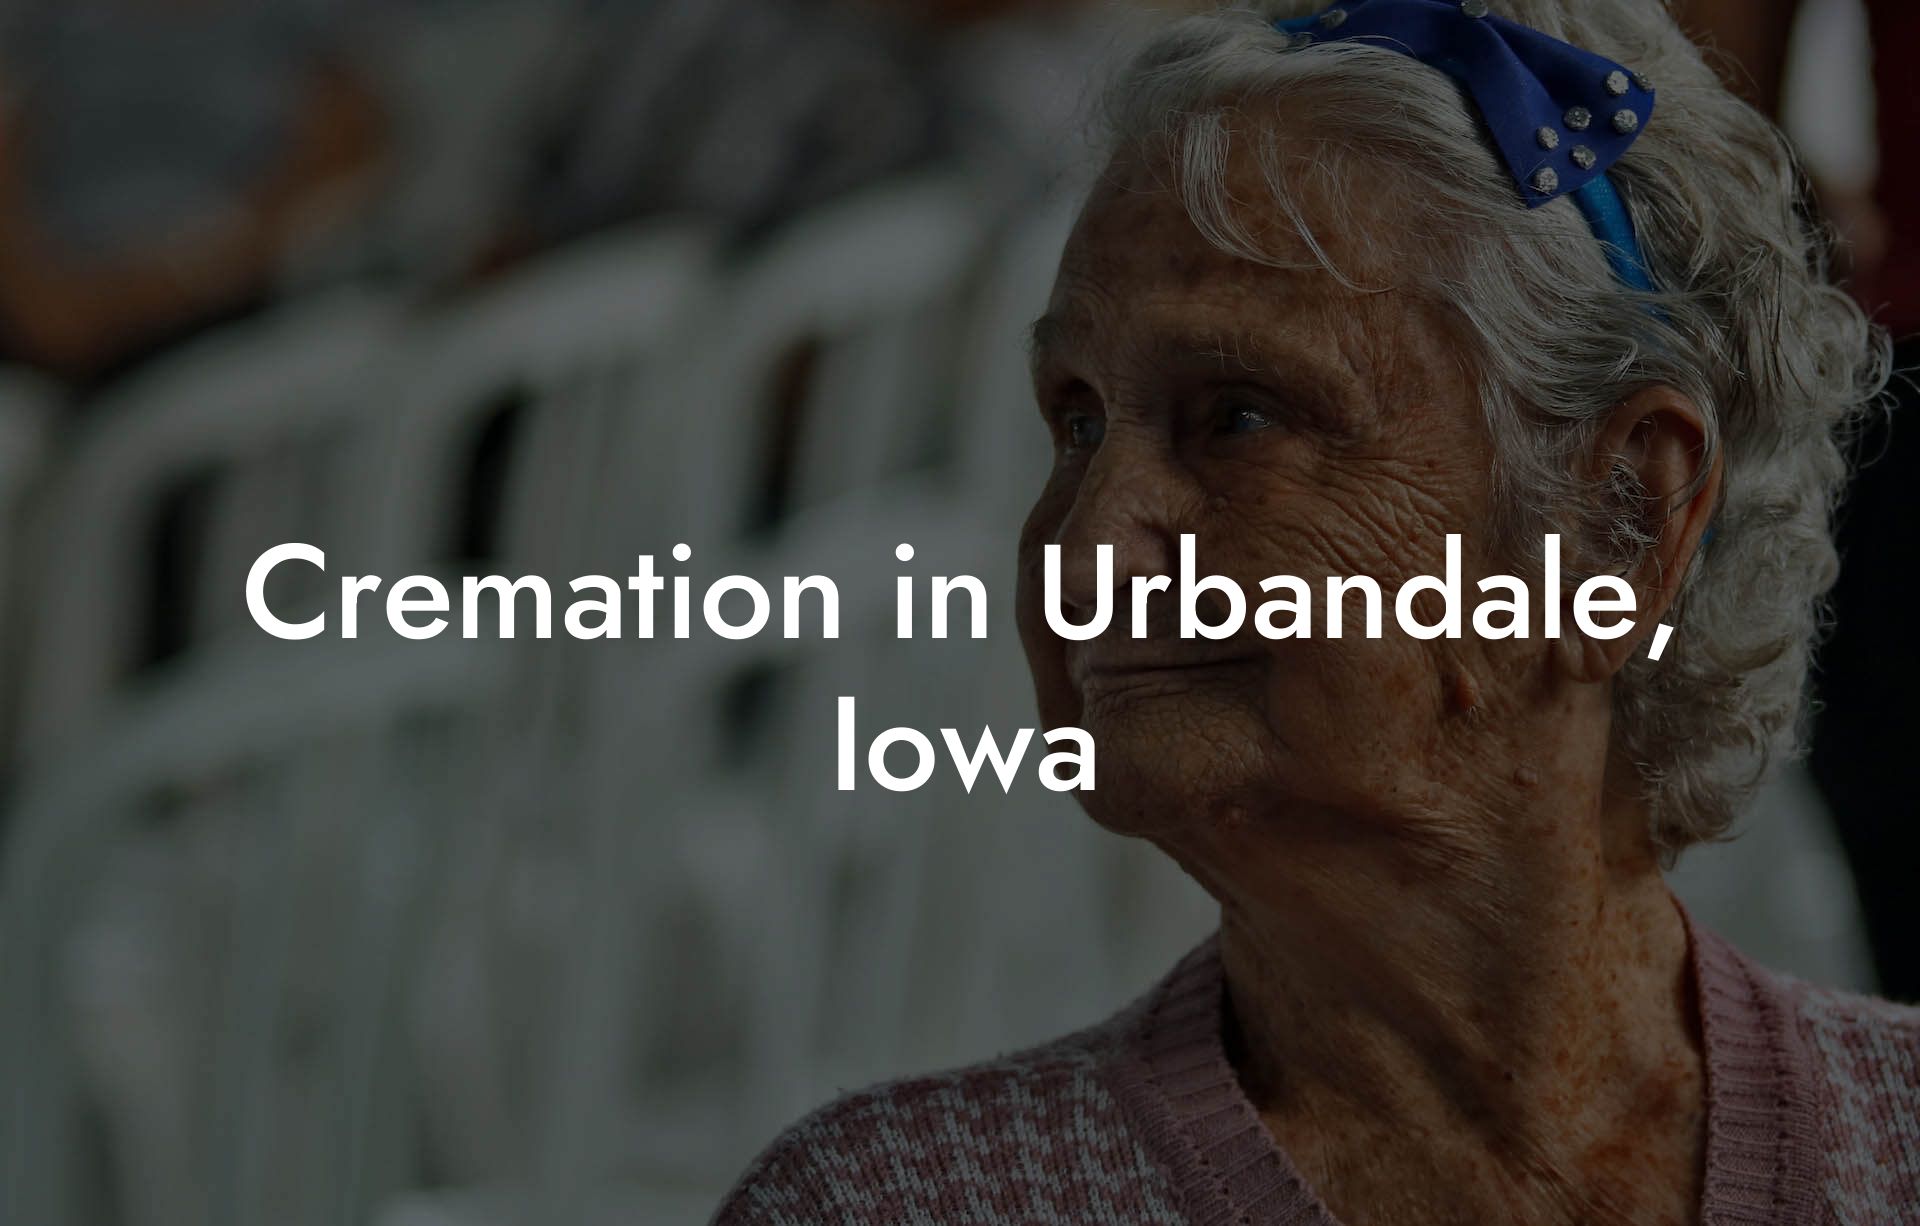 Cremation in Urbandale, Iowa